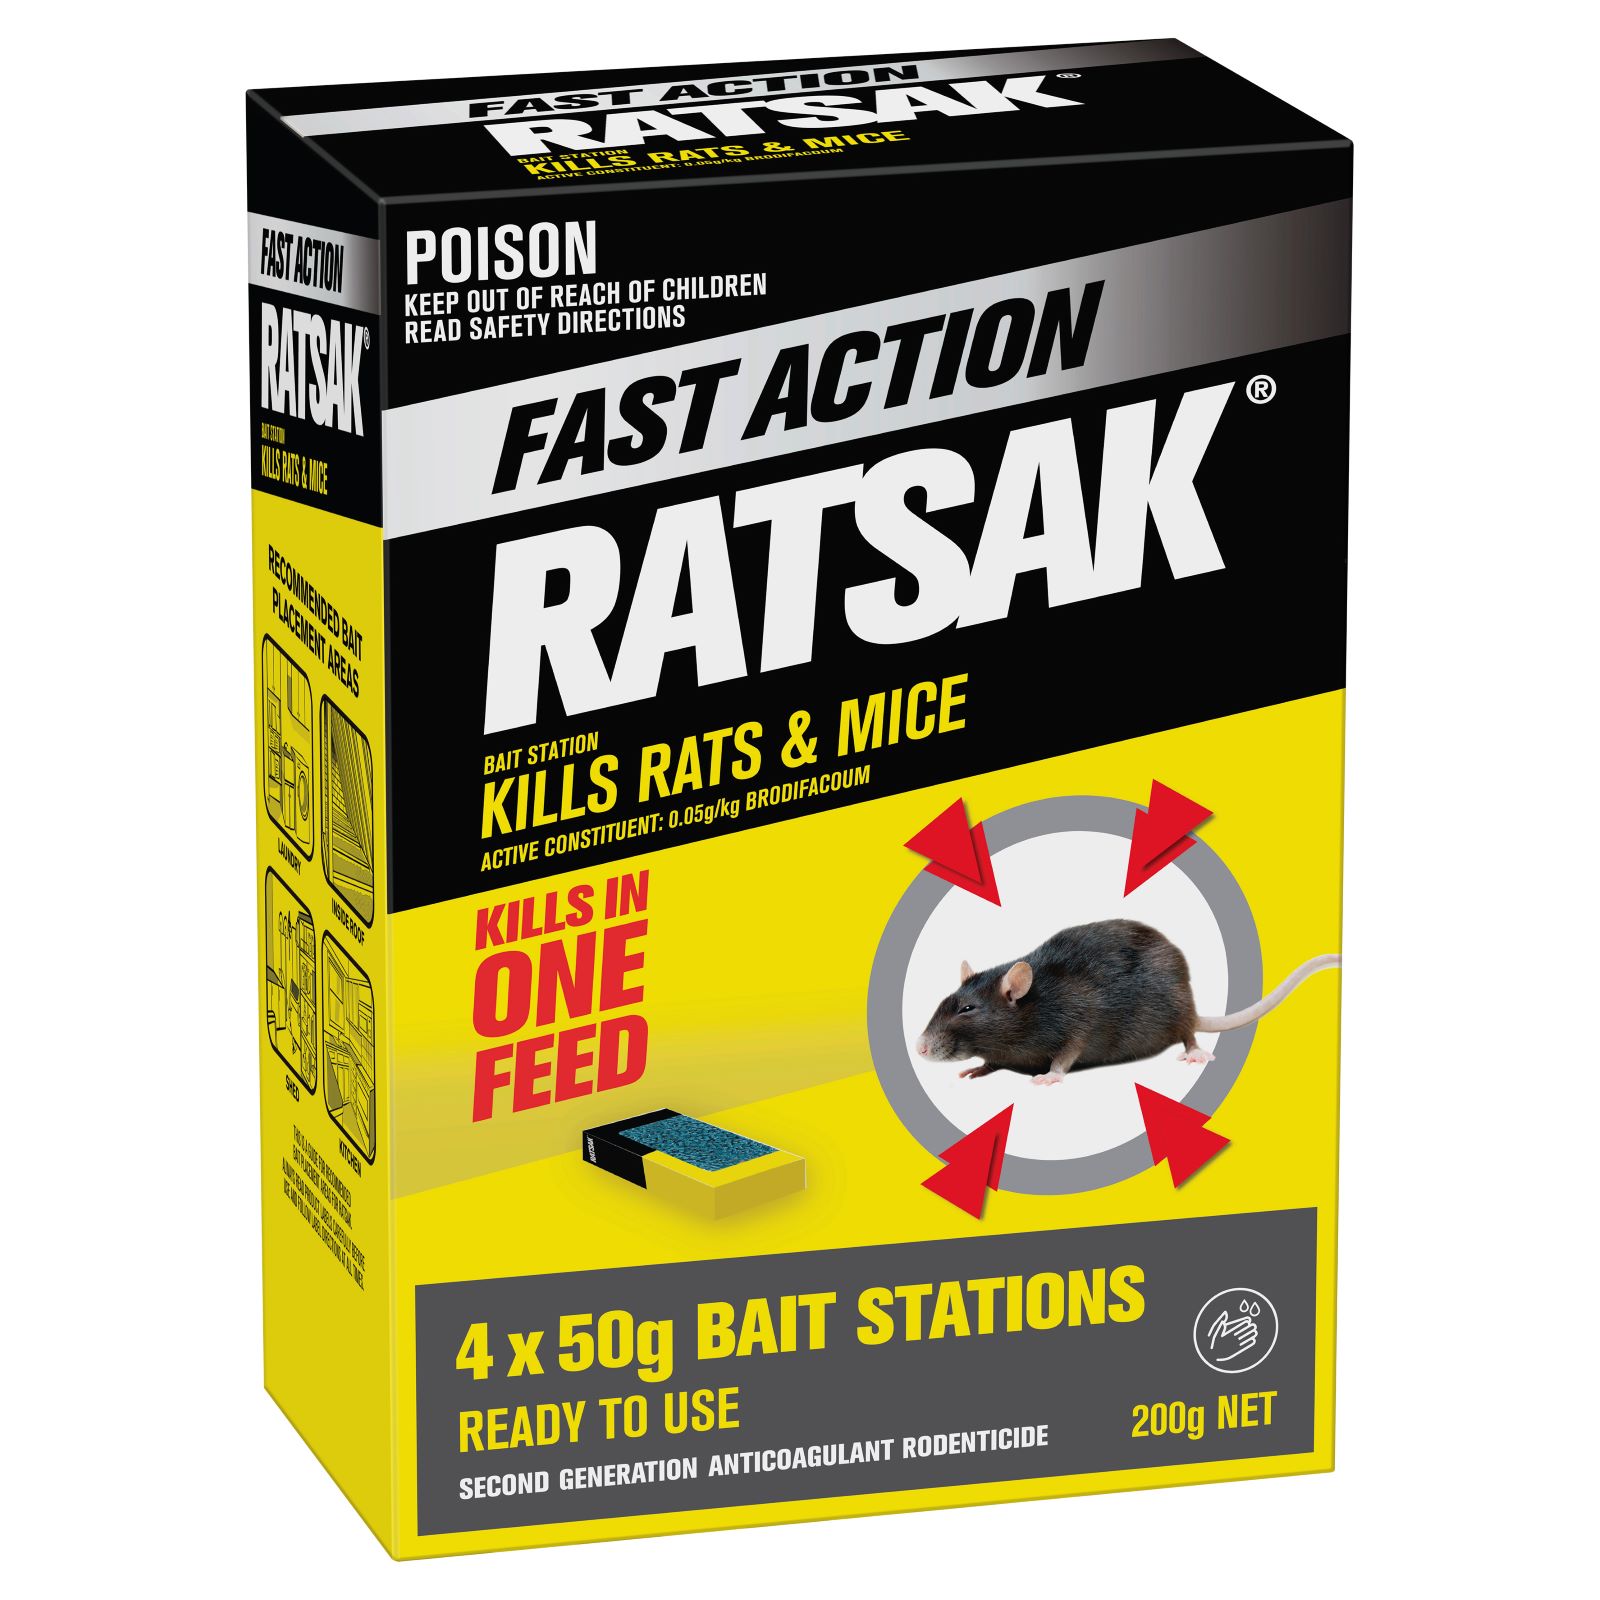 Great bait station to control mice and rats - ORKIDA